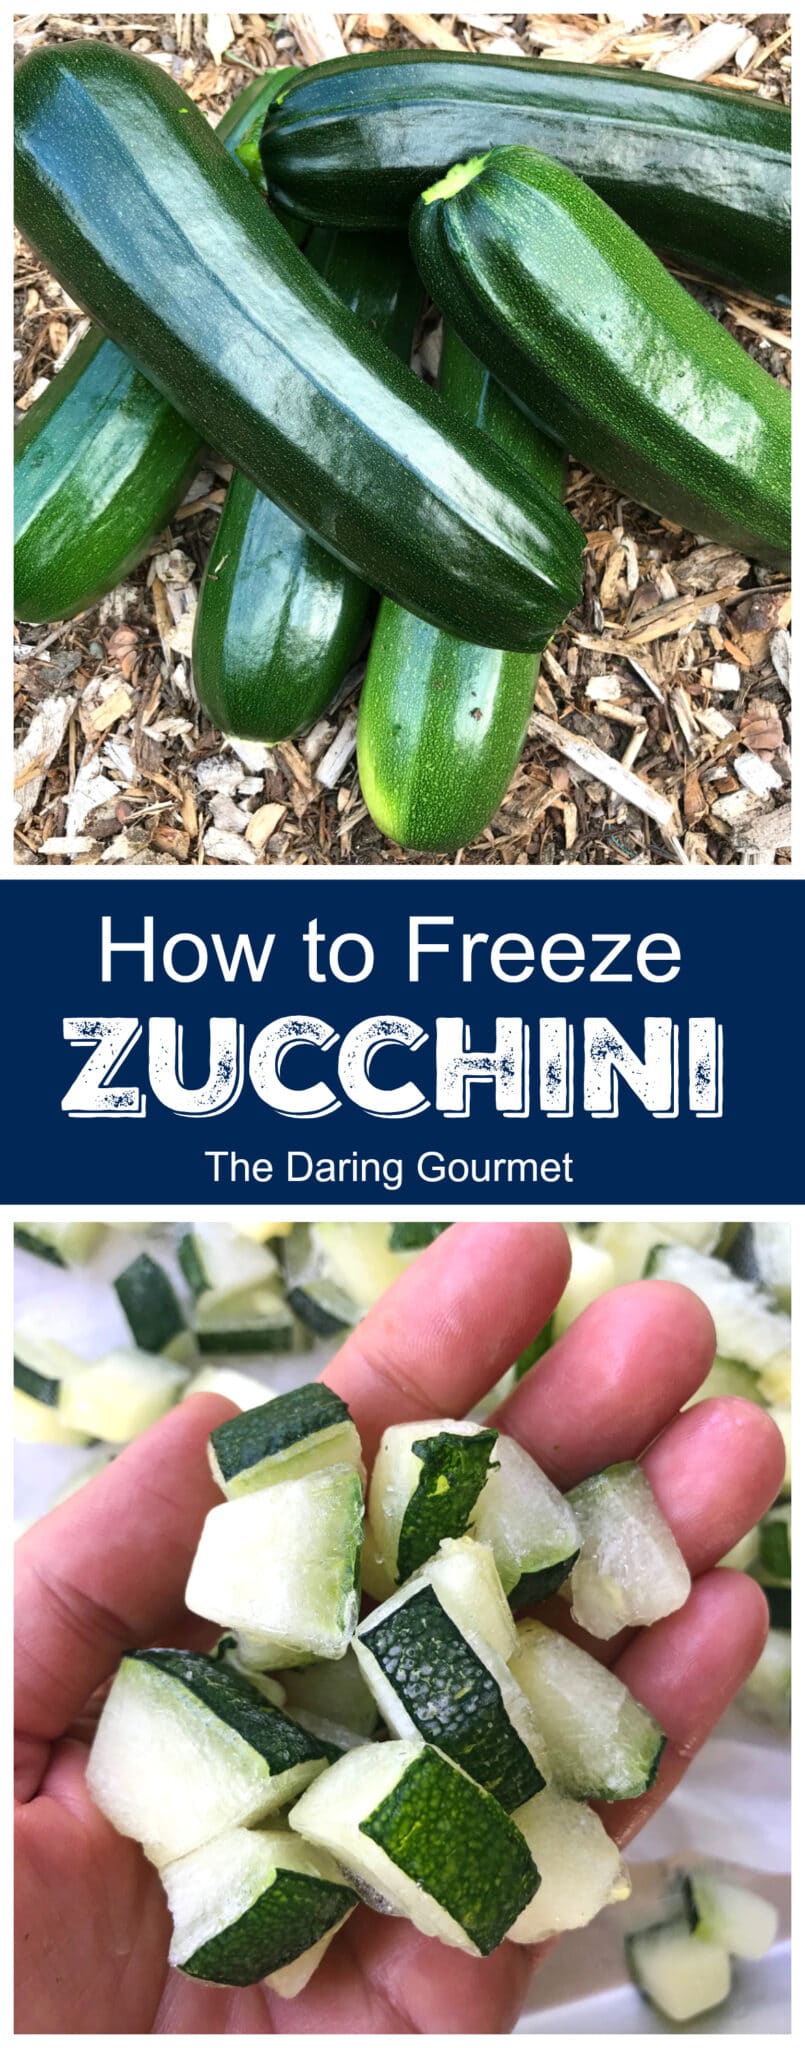 how to freeze zucchini summer squash courgettes